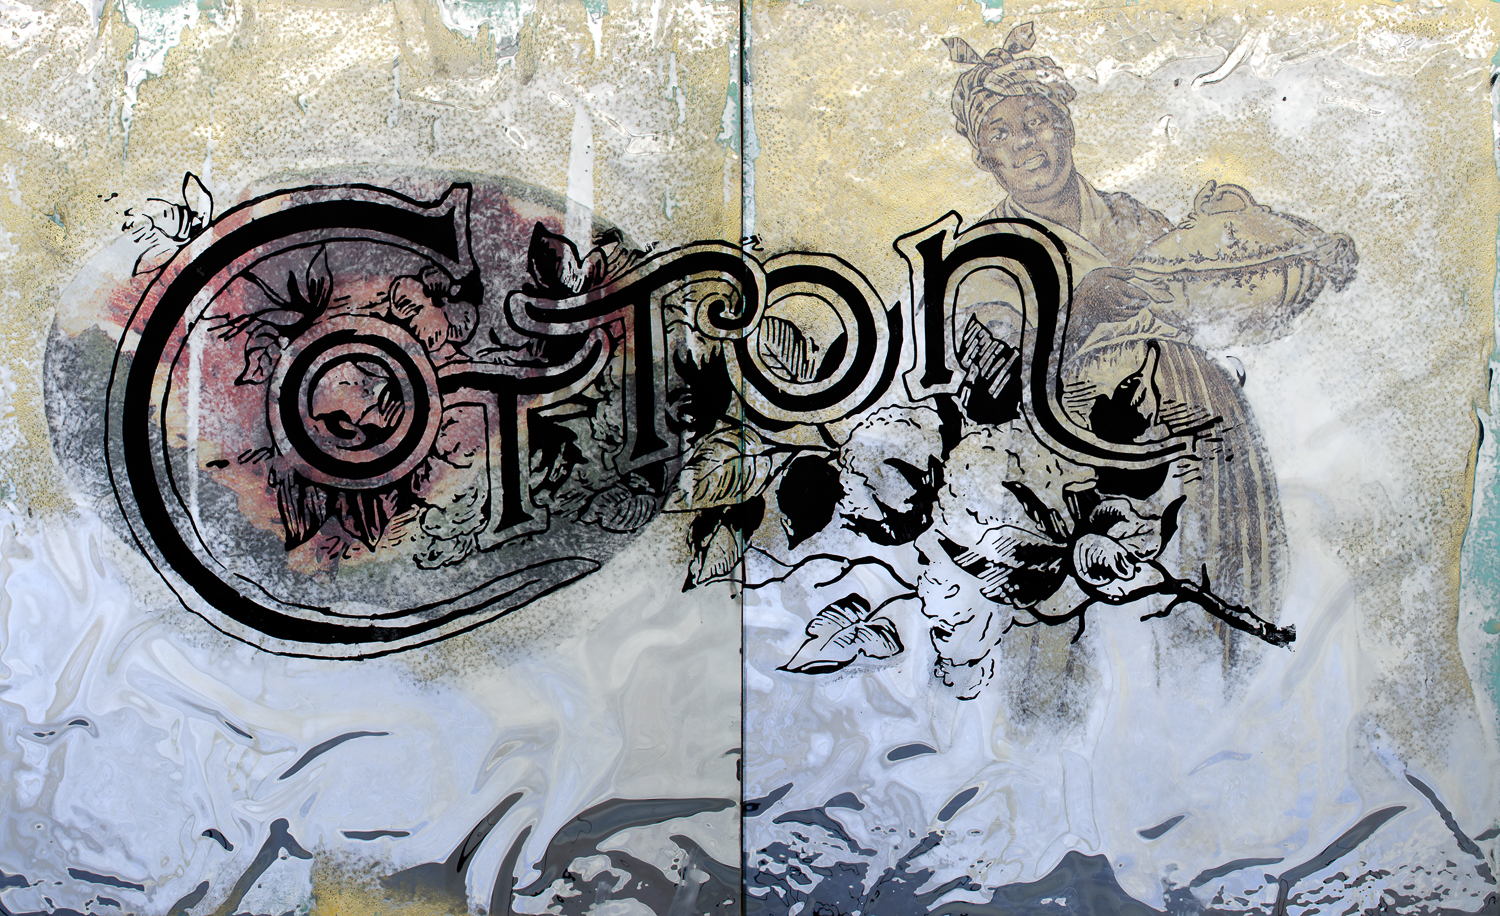    Tignon   2015 49 x 80 Mylar, paper, charcoal dust and enamel paint on wood 